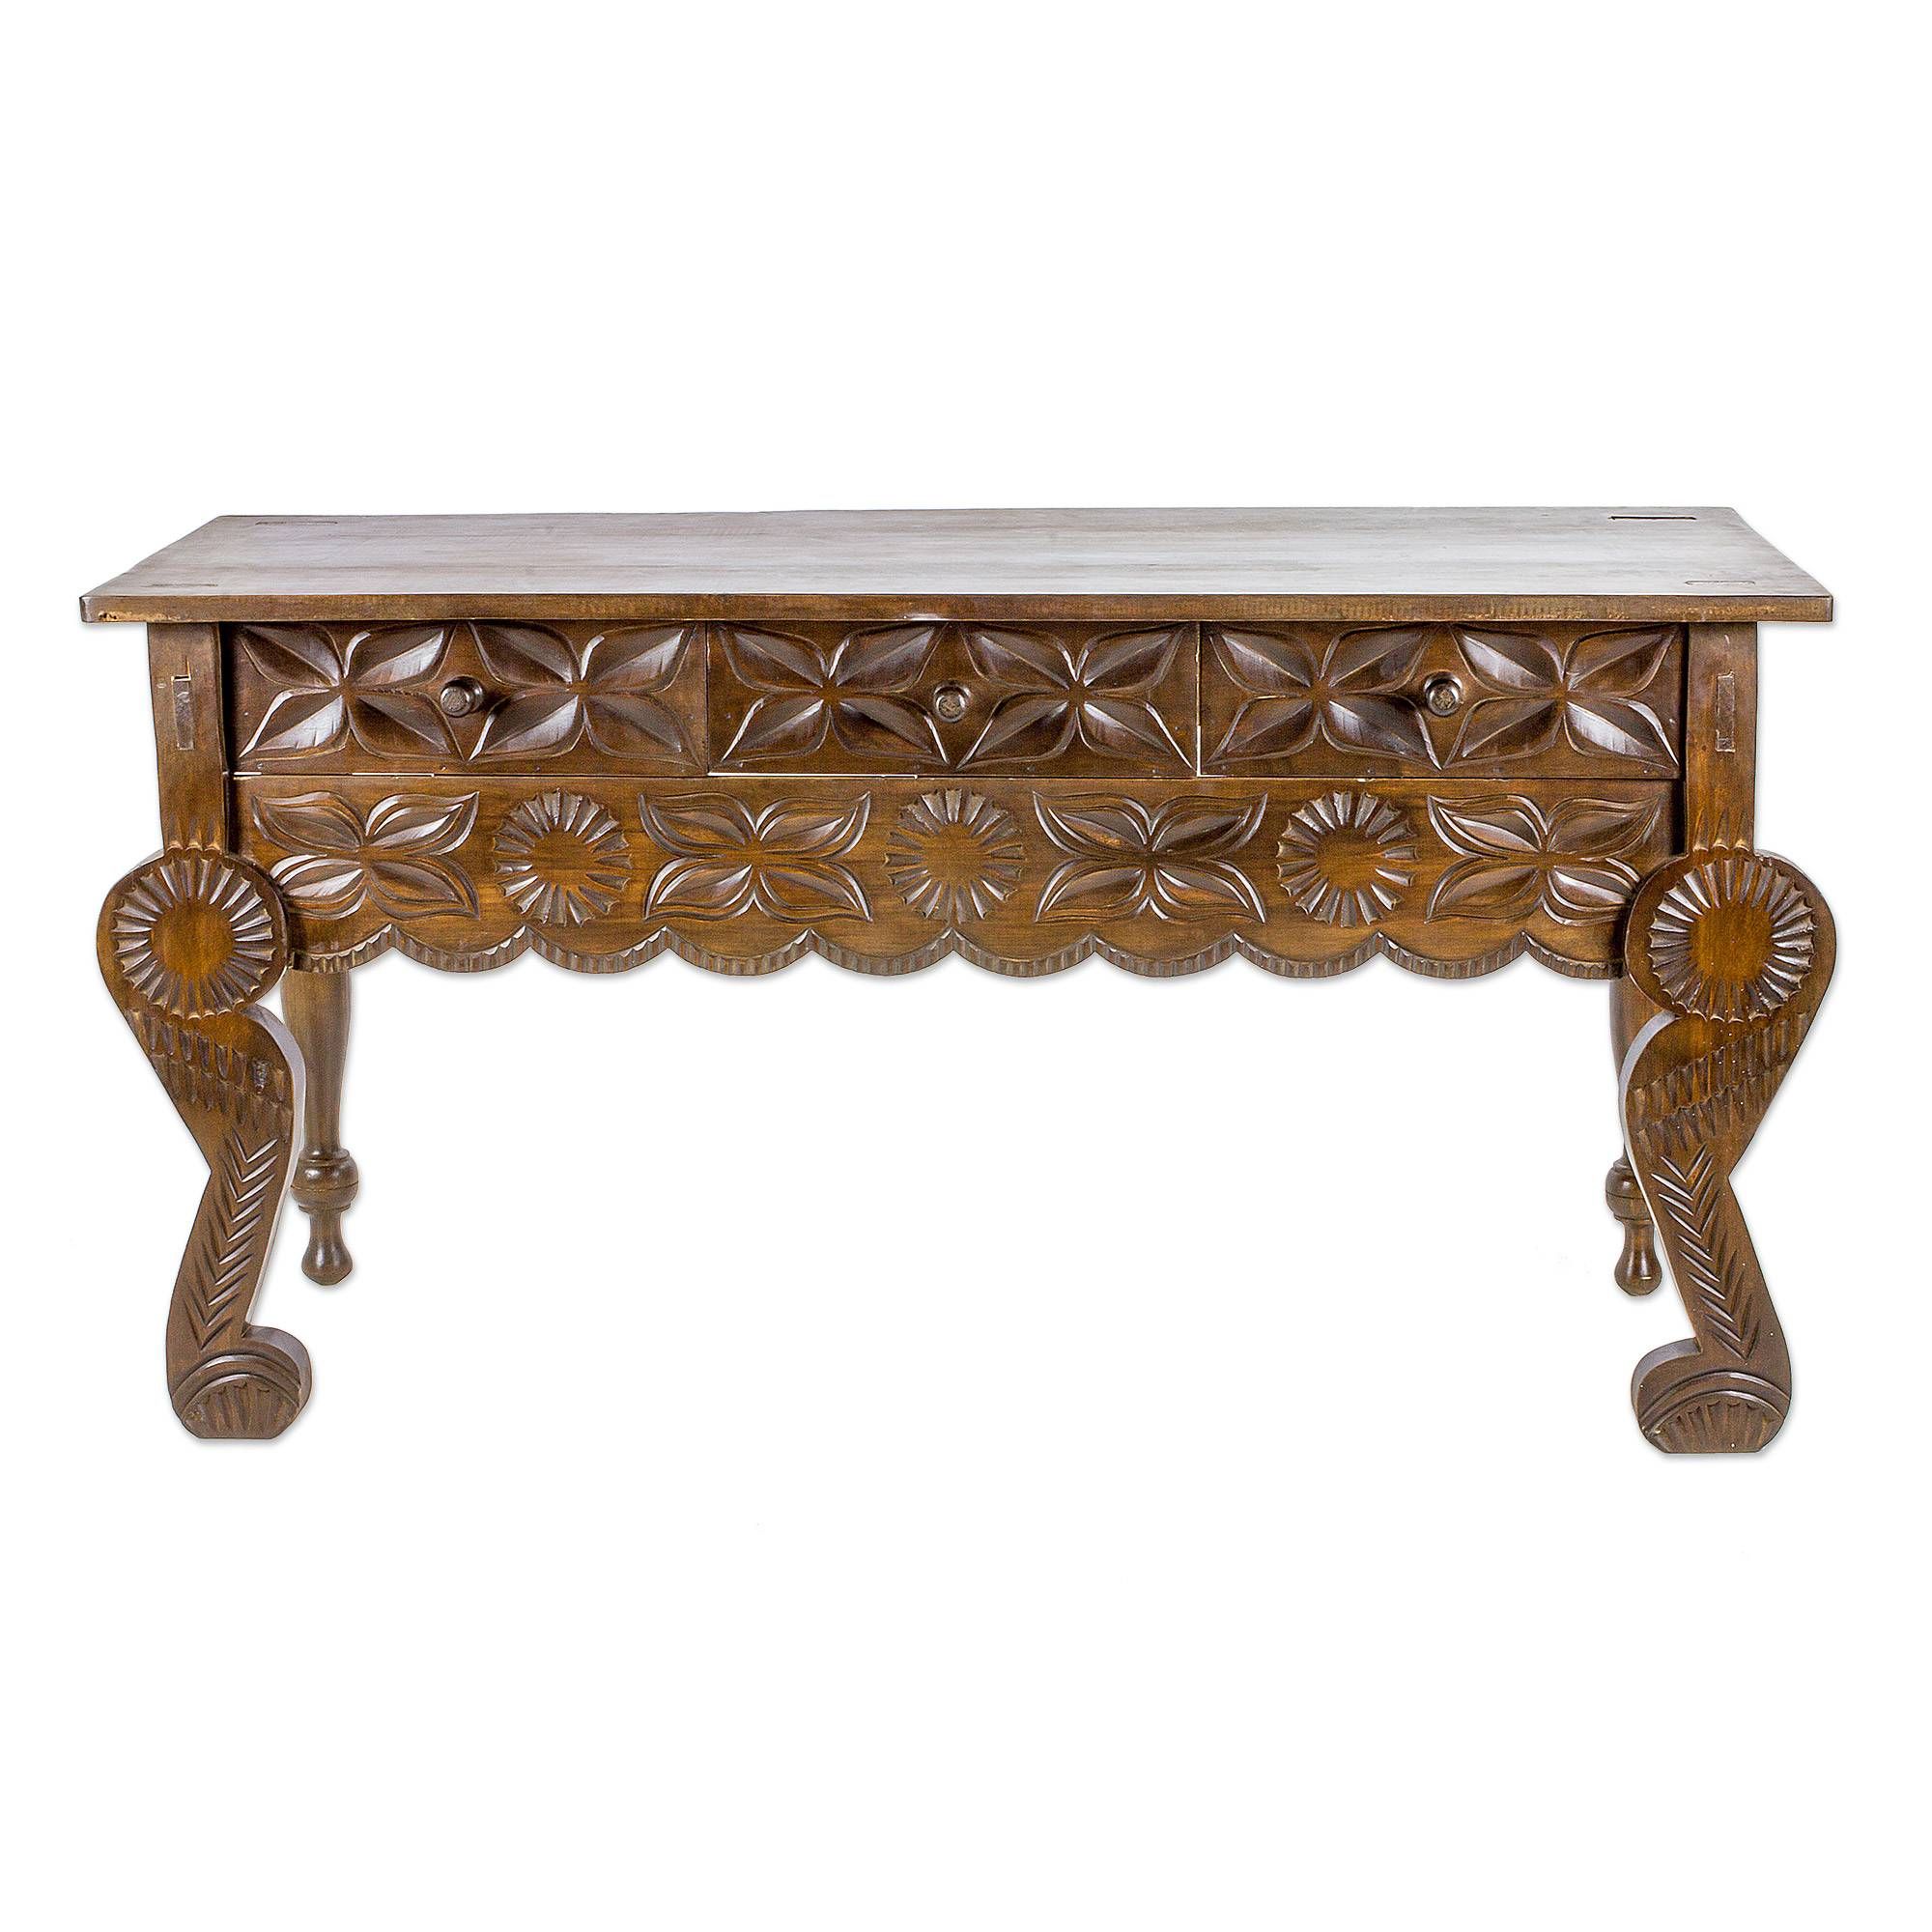 Rustic Bronze Patina Console Tables Pertaining To Most Recent Handcrafted Wood Console Table From Guatemala – Floral (View 9 of 10)